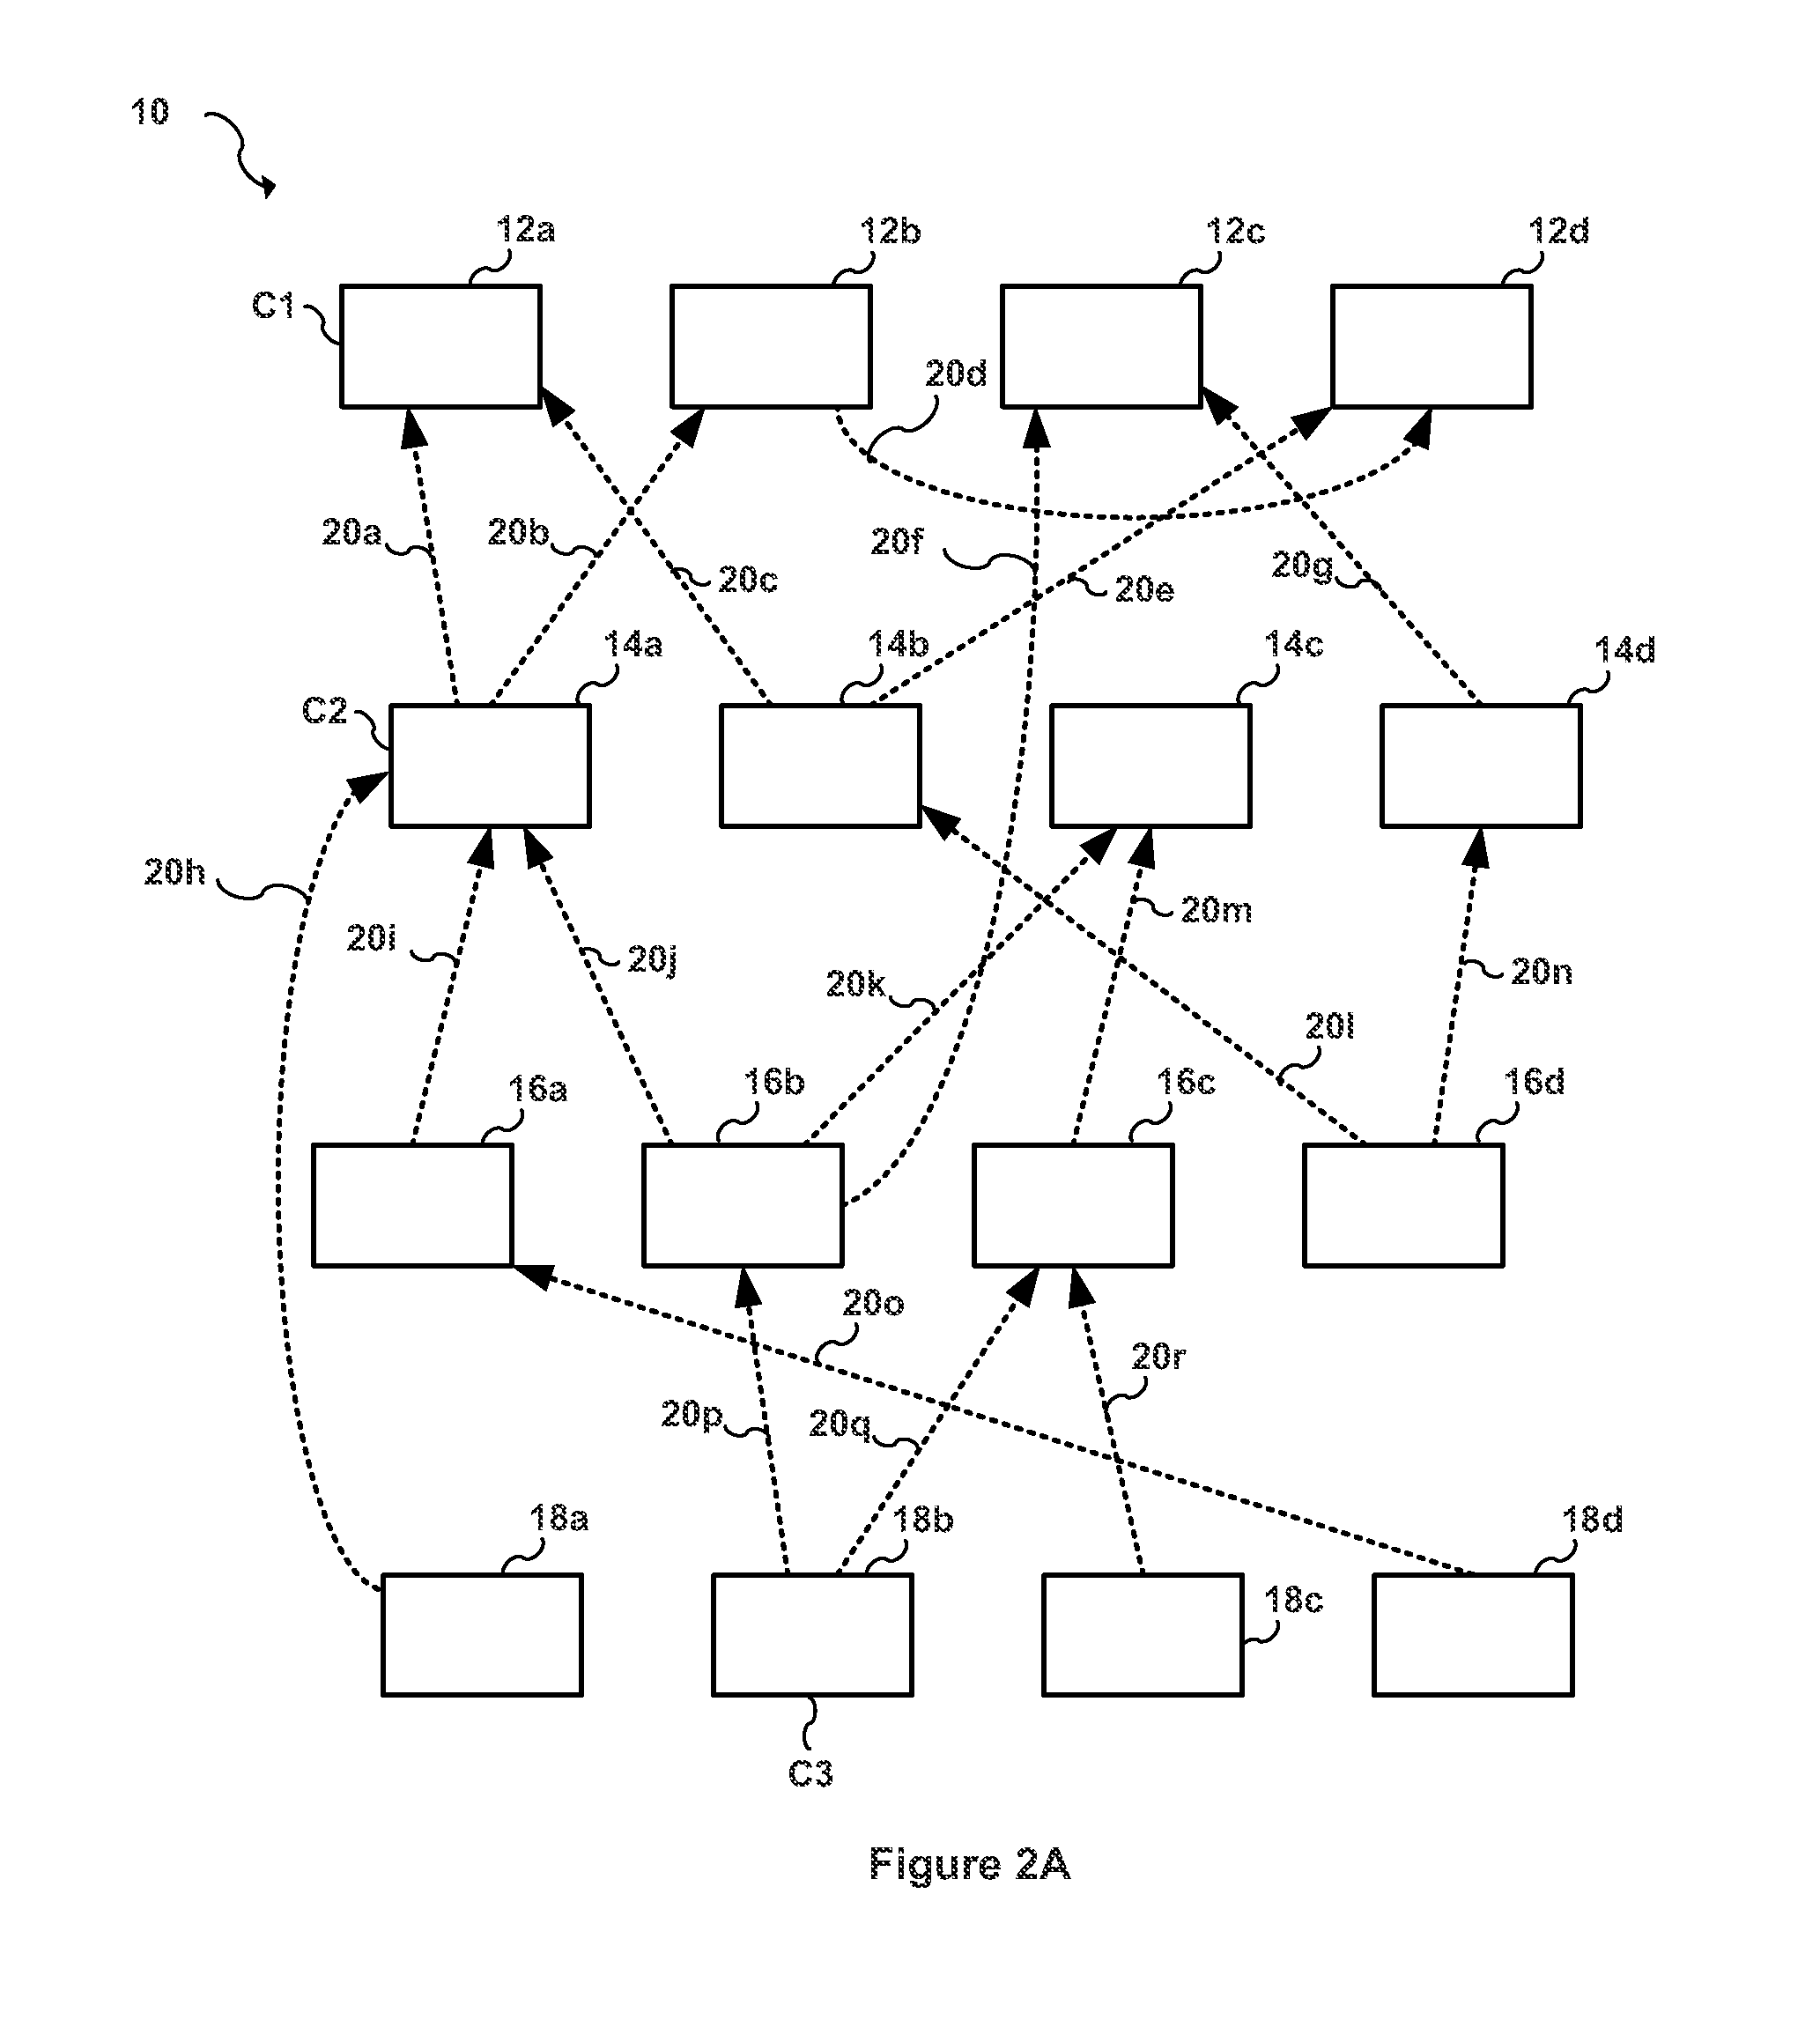 System, computer program and method for implementing and managing a value chain network